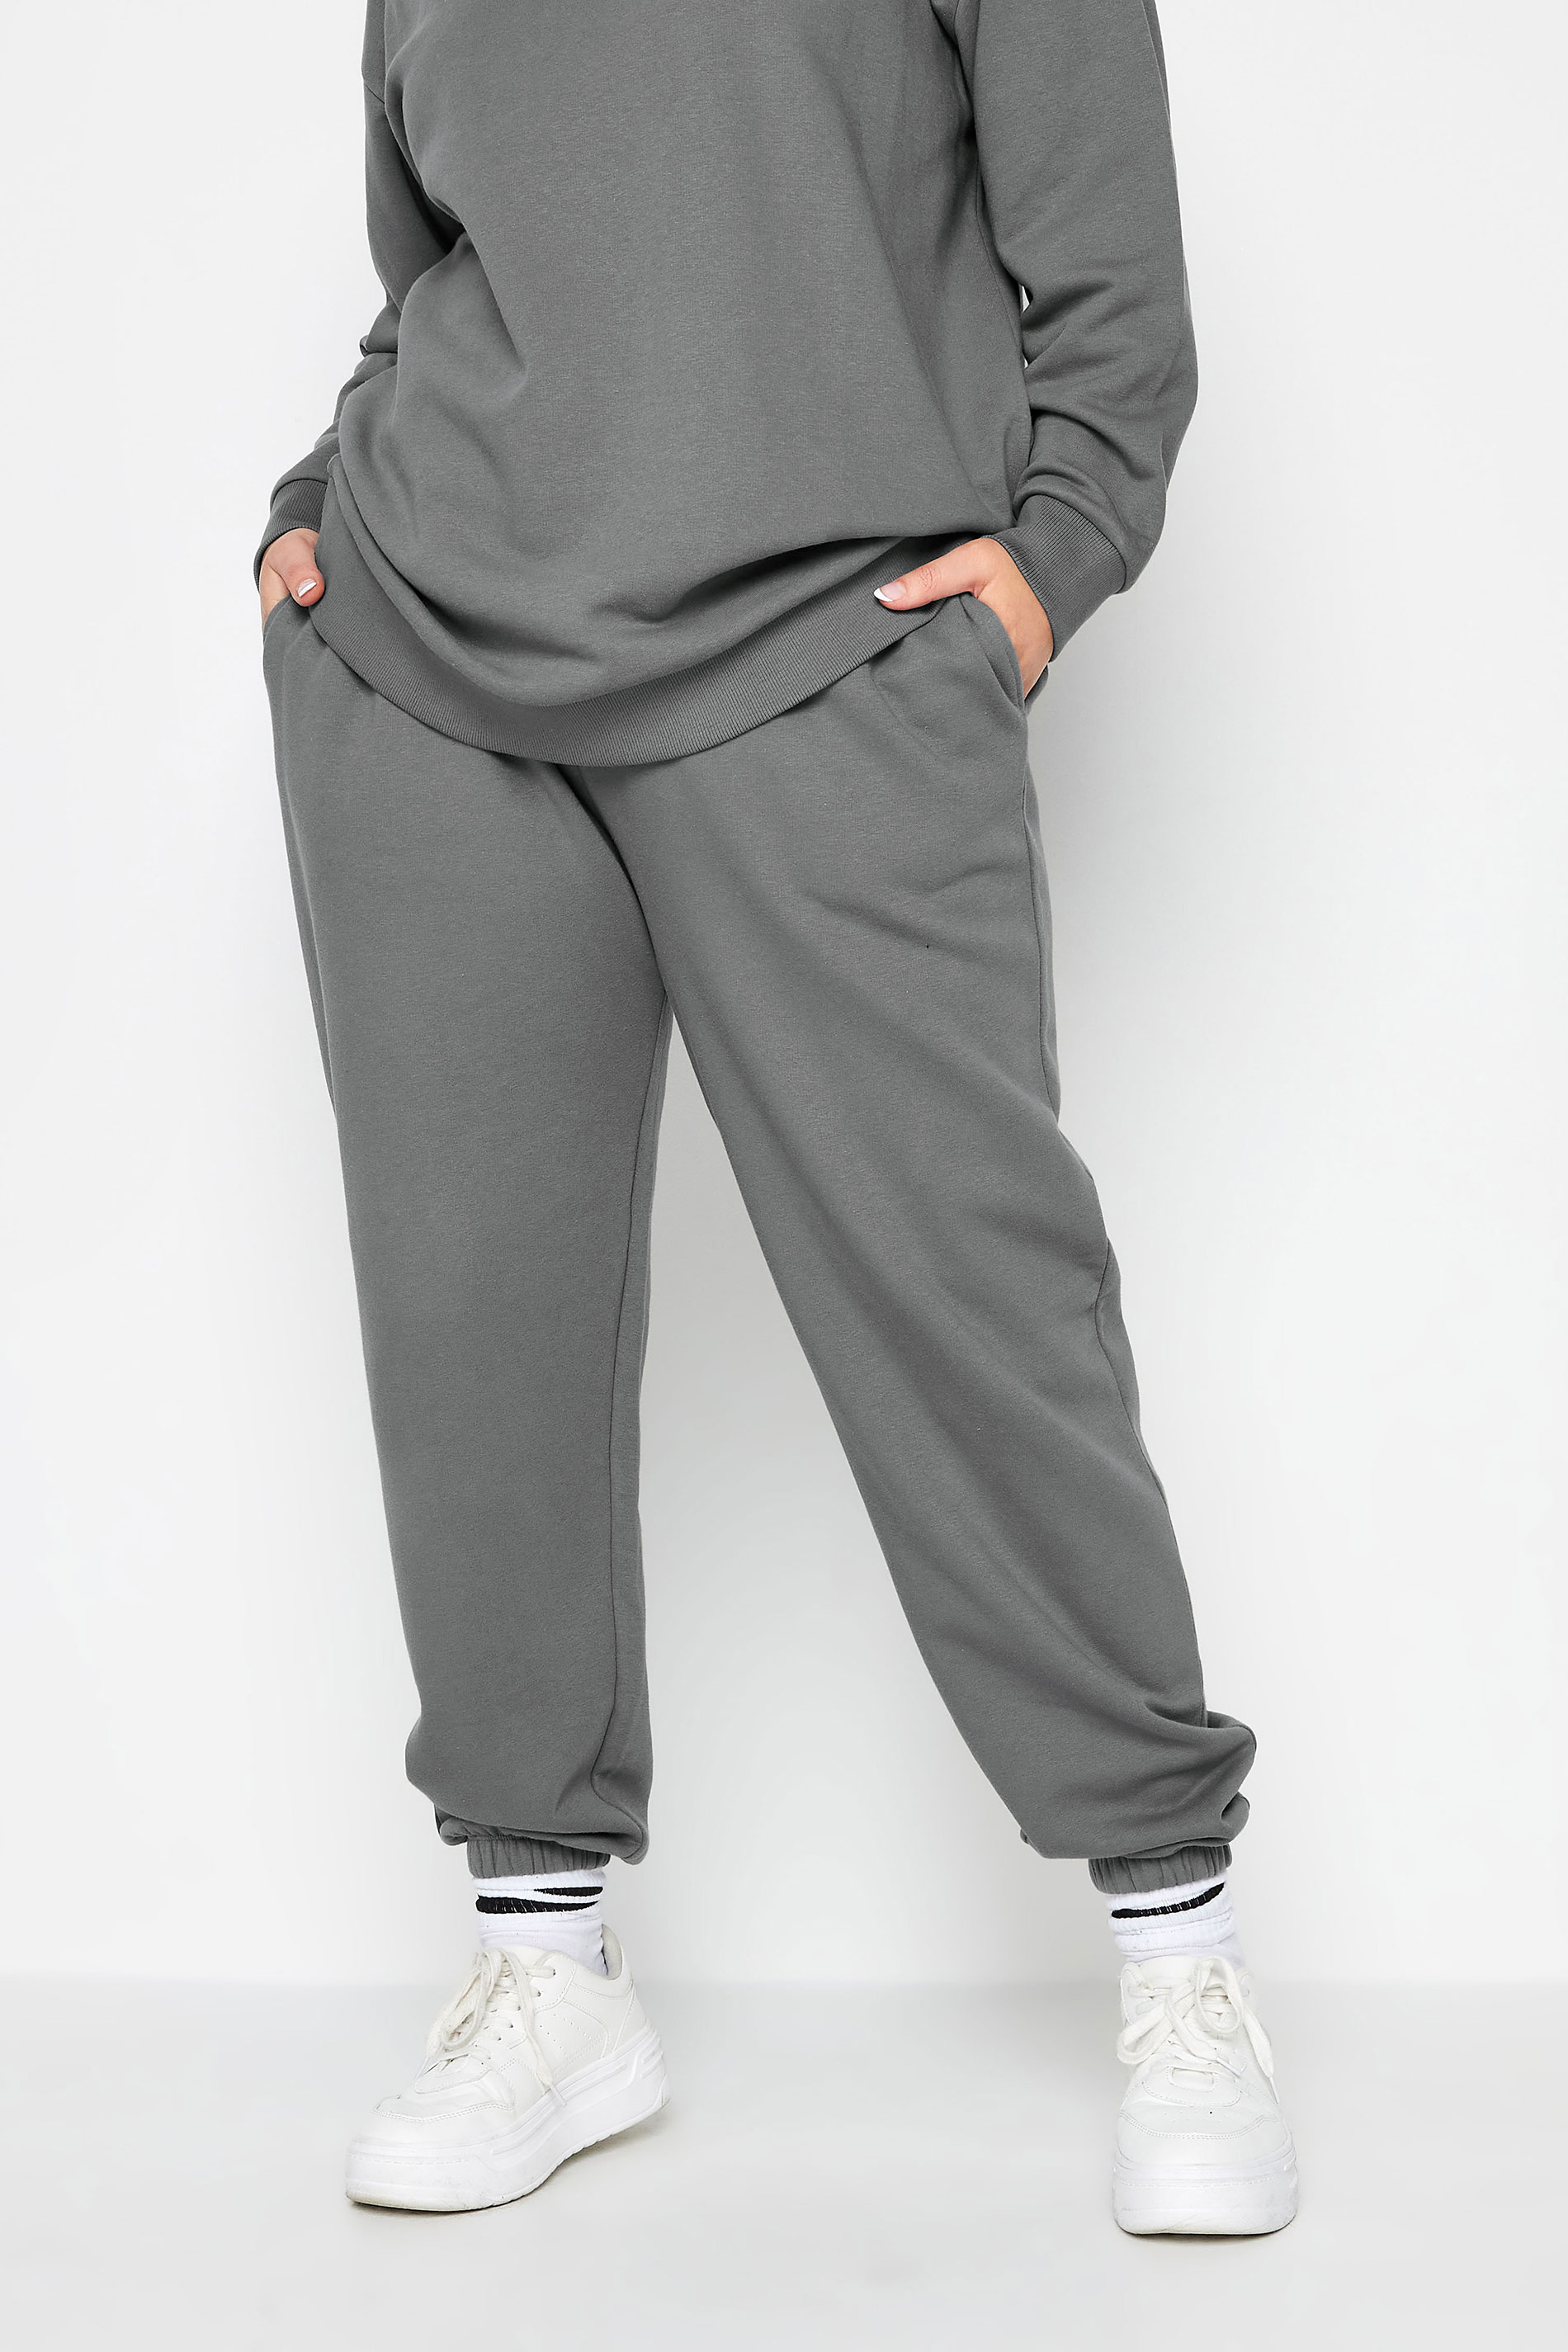 YOURS Curve Grey Cuffed Joggers | Yours Clothing 1